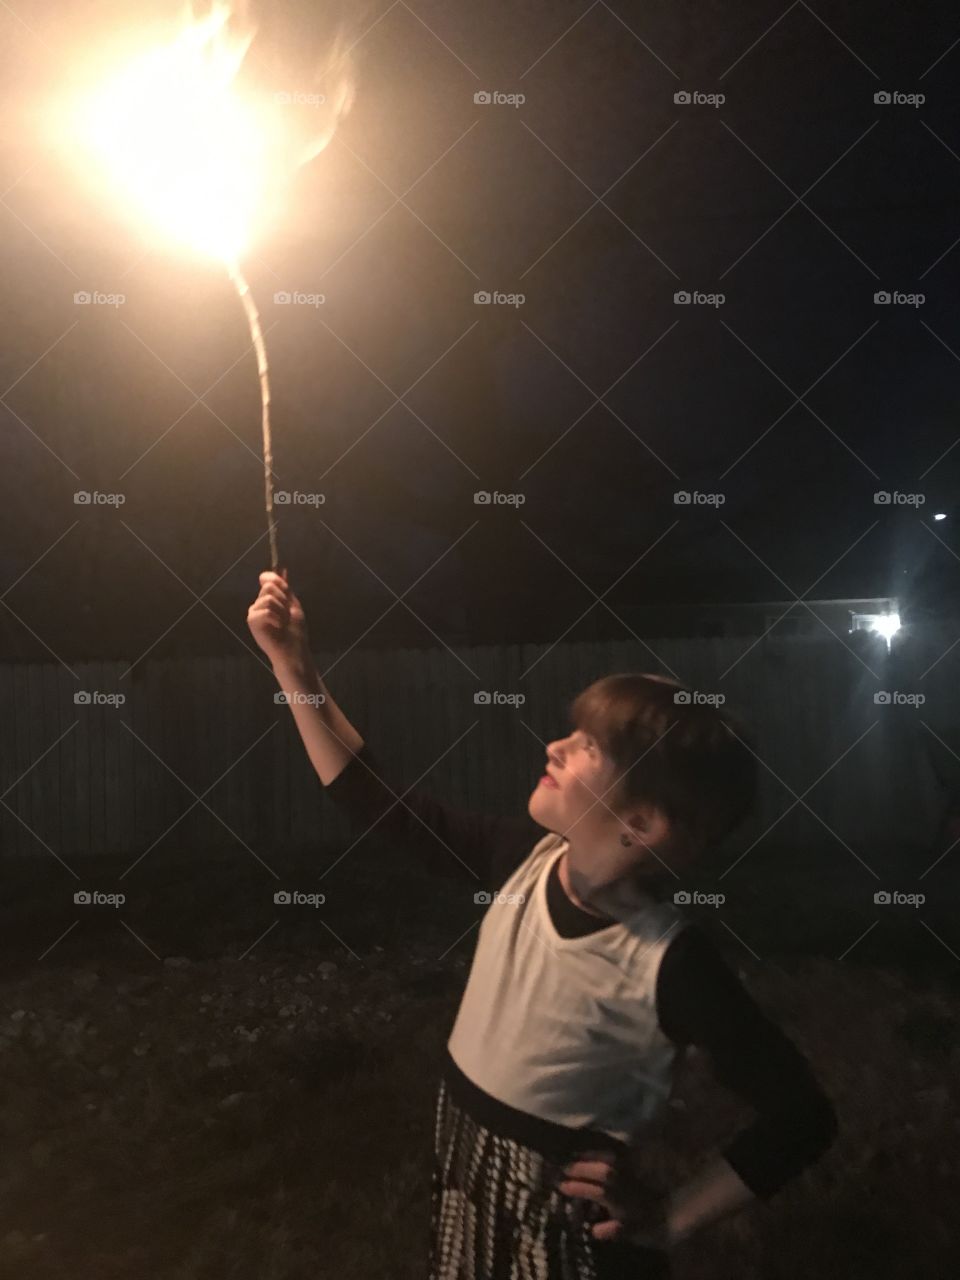 Holding fire 